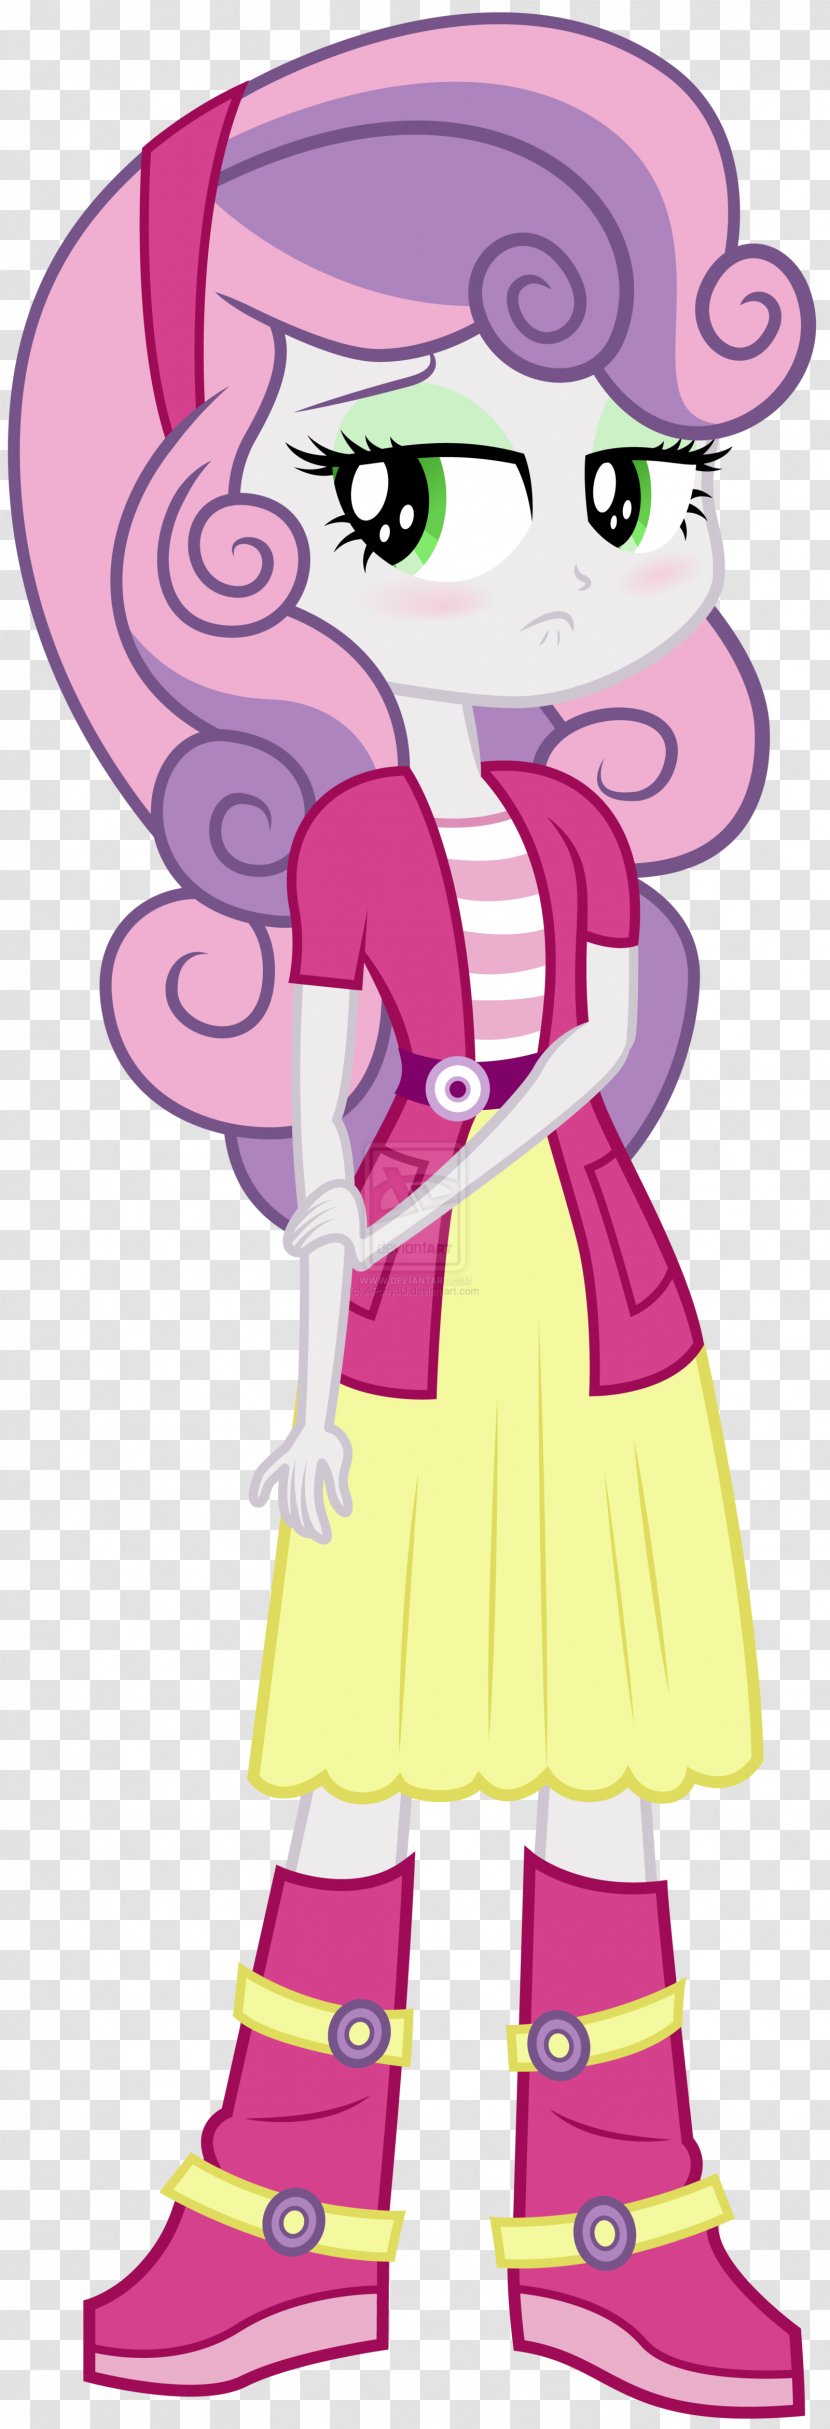 Sweetie Belle My Little Pony: Equestria Girls Female Art - Tree - Guinea Pig Transparent PNG